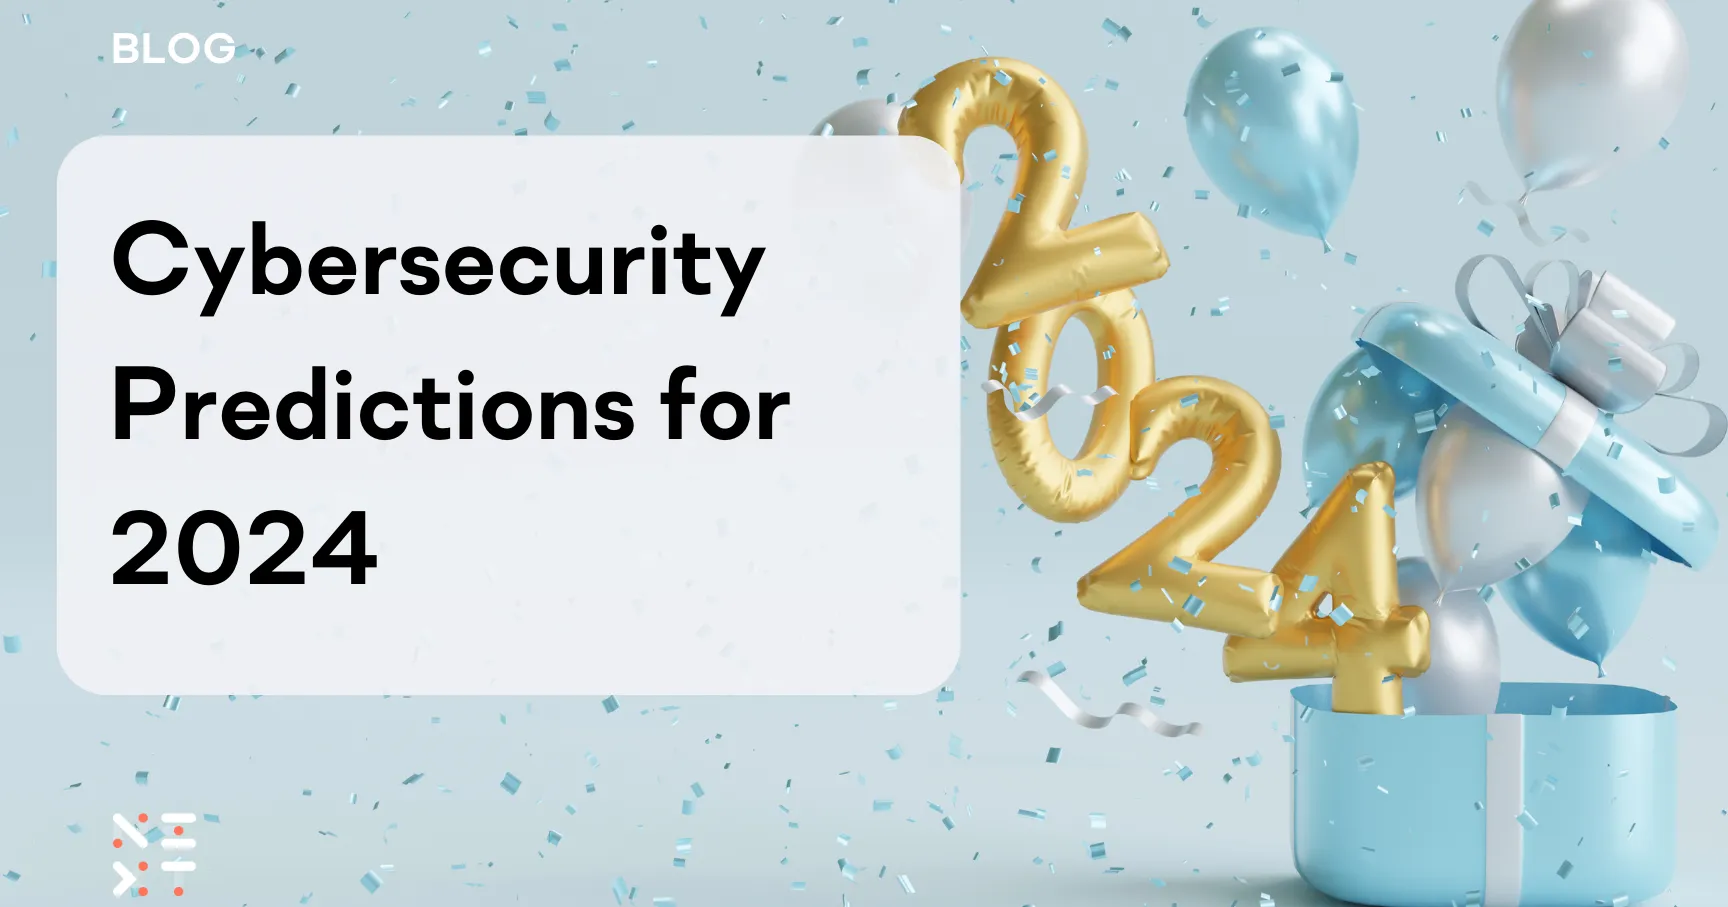 Cybersecurity Predictions for 2024